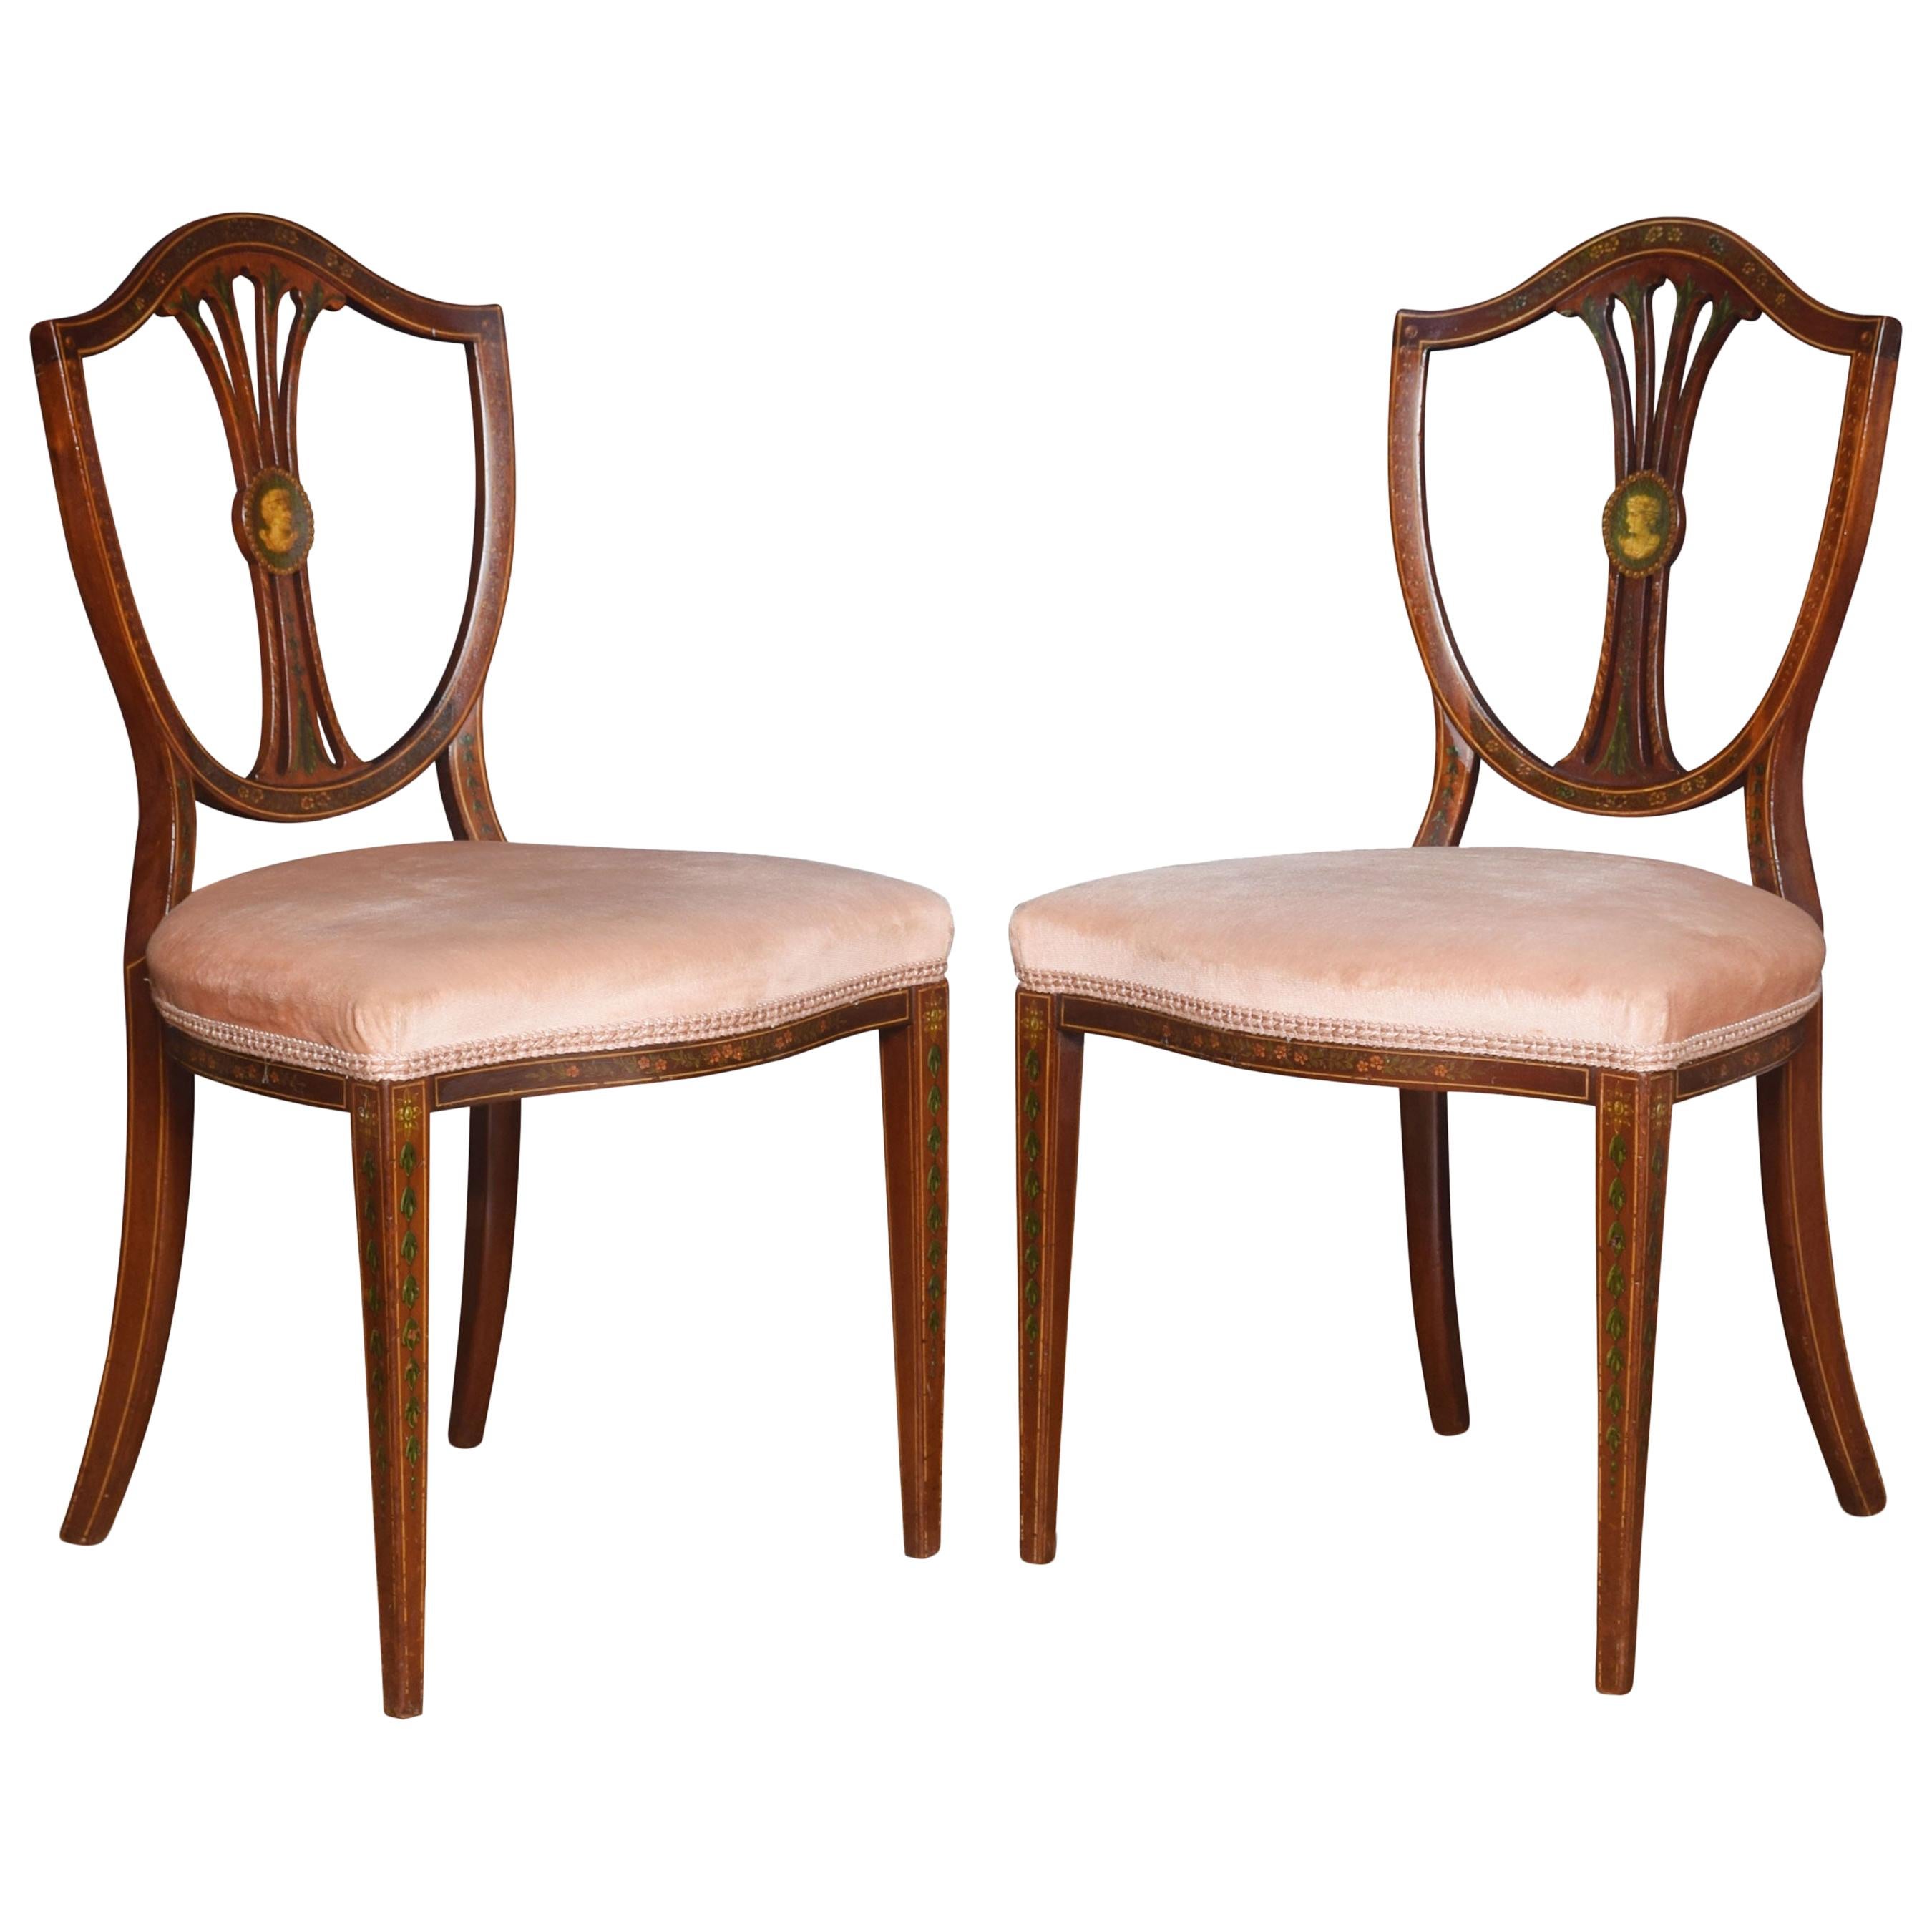 Pair of 19th Century Side Chairs by Edwards and Roberts